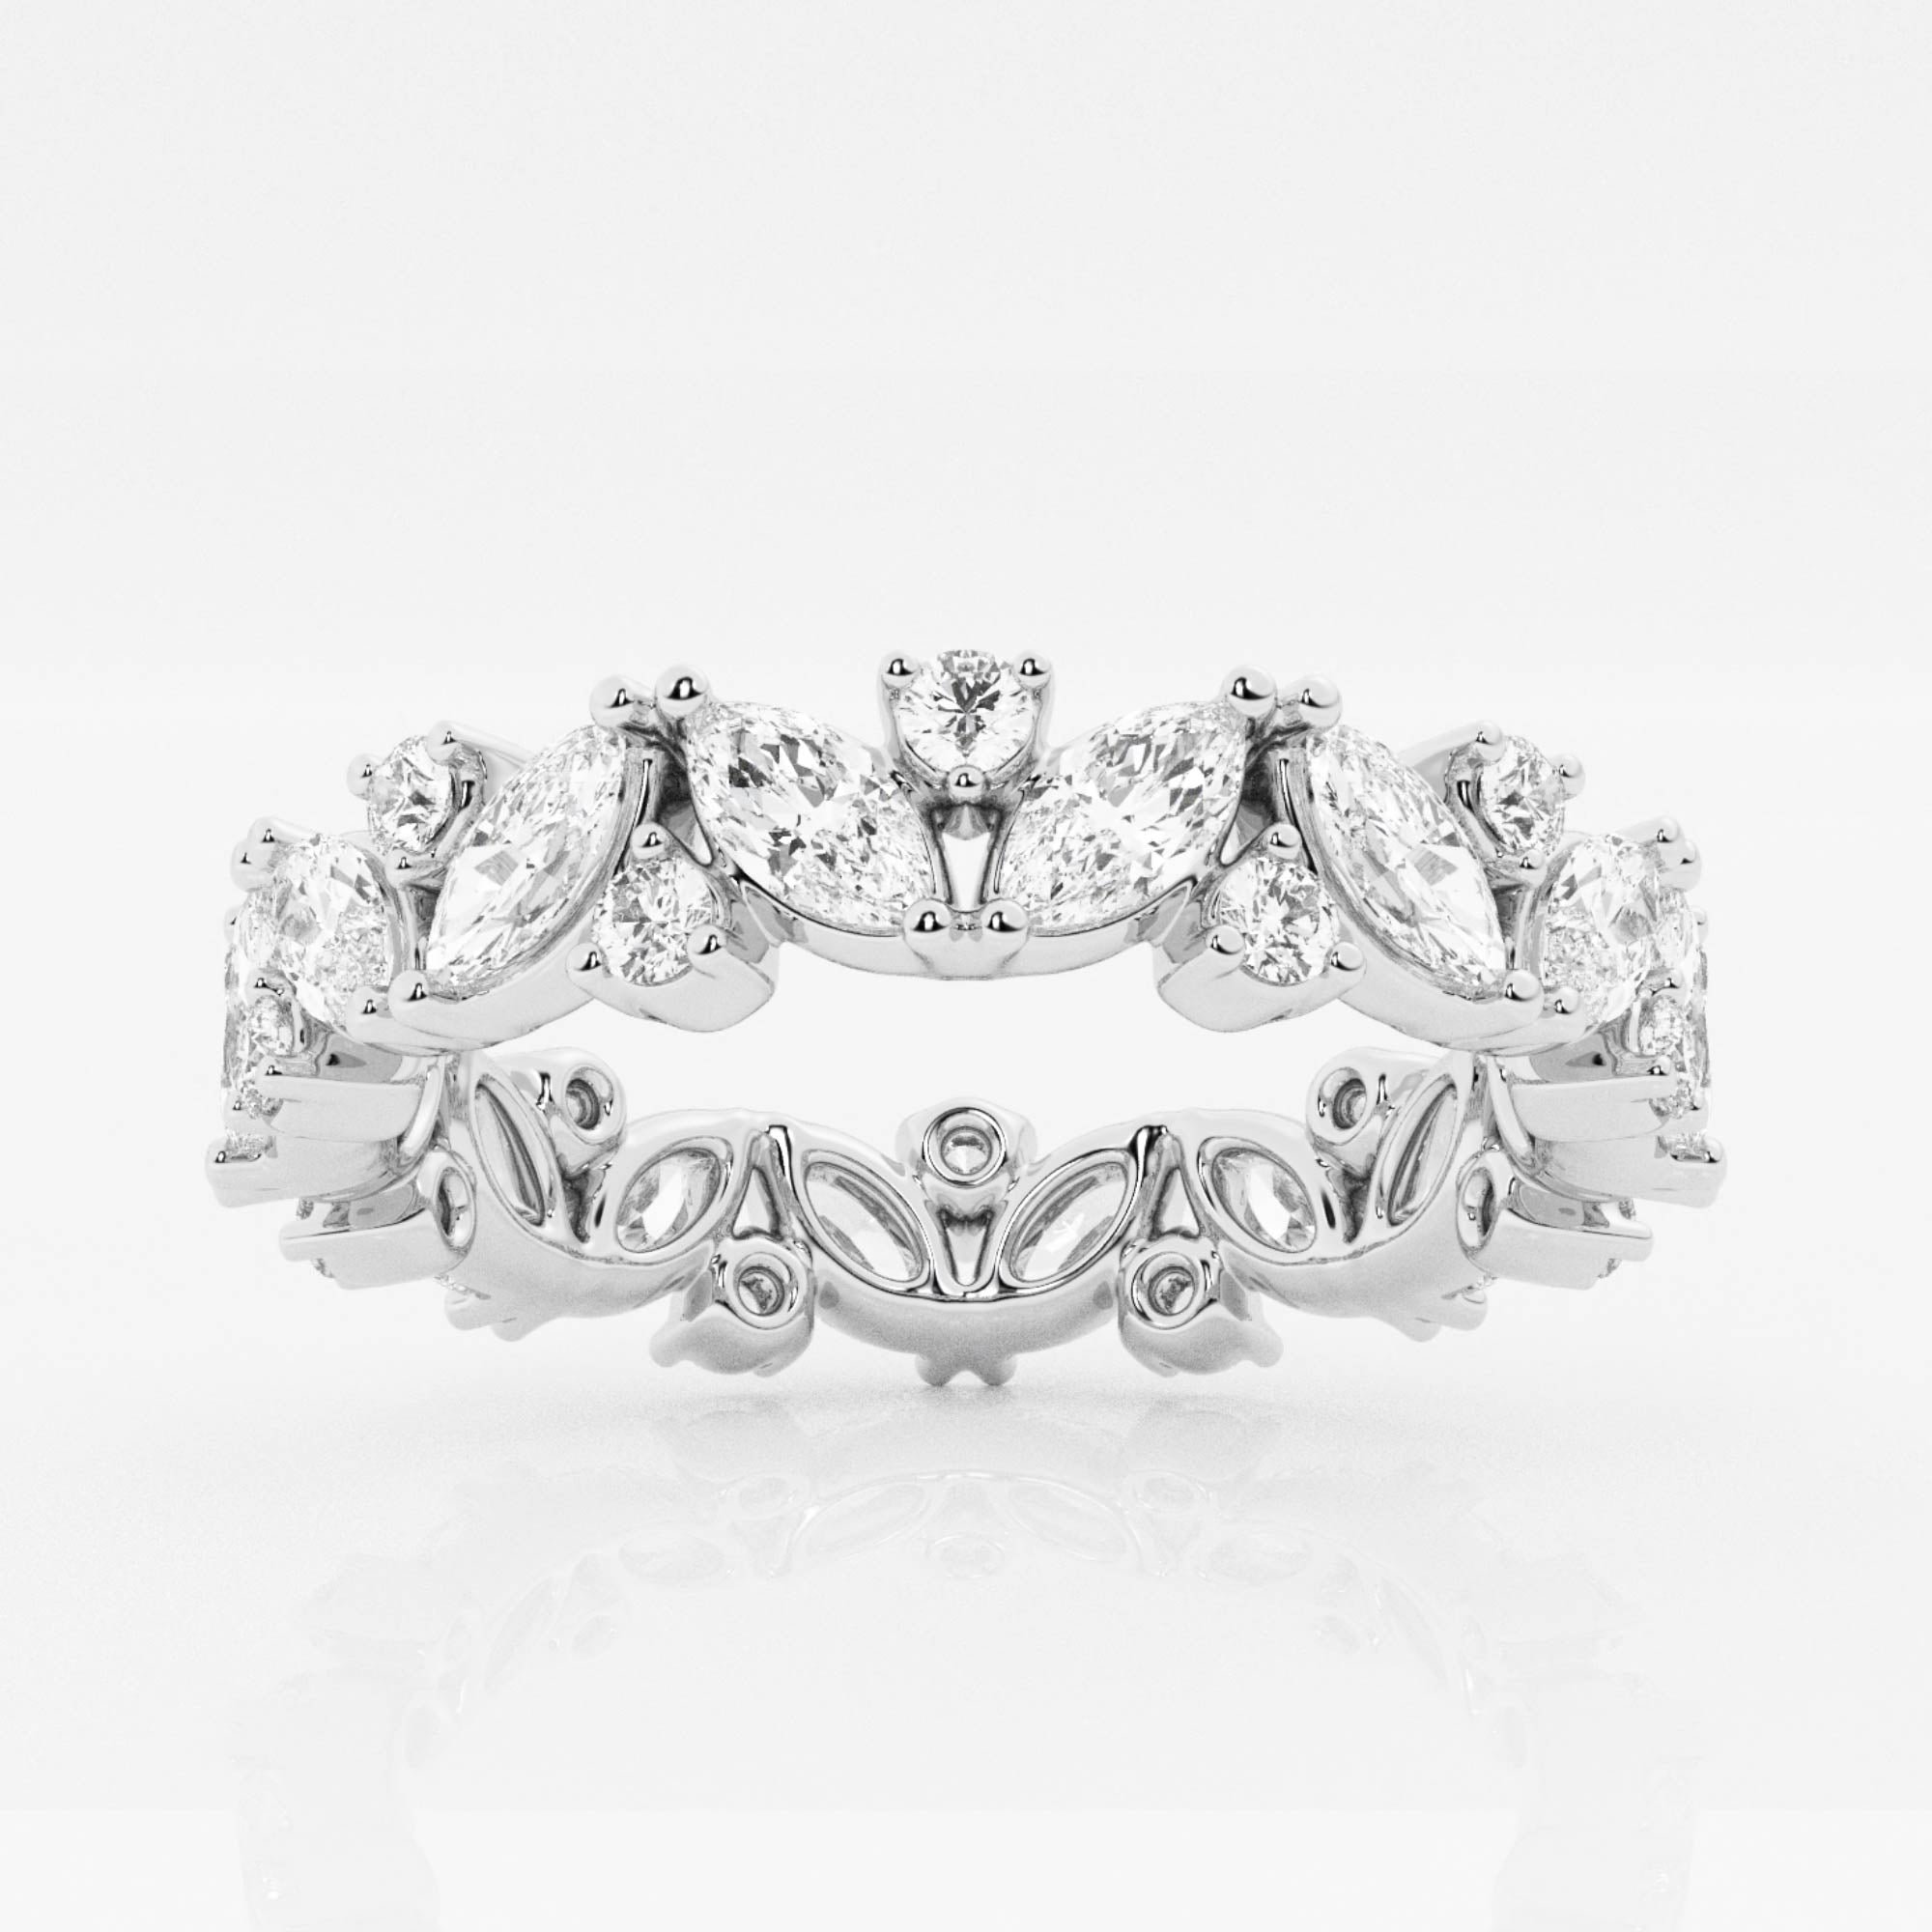 14kt white gold/4/4.25/4.5/4.75/5/5.25/5.5/5.75/6/6.25/6.5/6.75/7/7.25/7.5/7.75/8/8.25/8.5/8.75/9/top